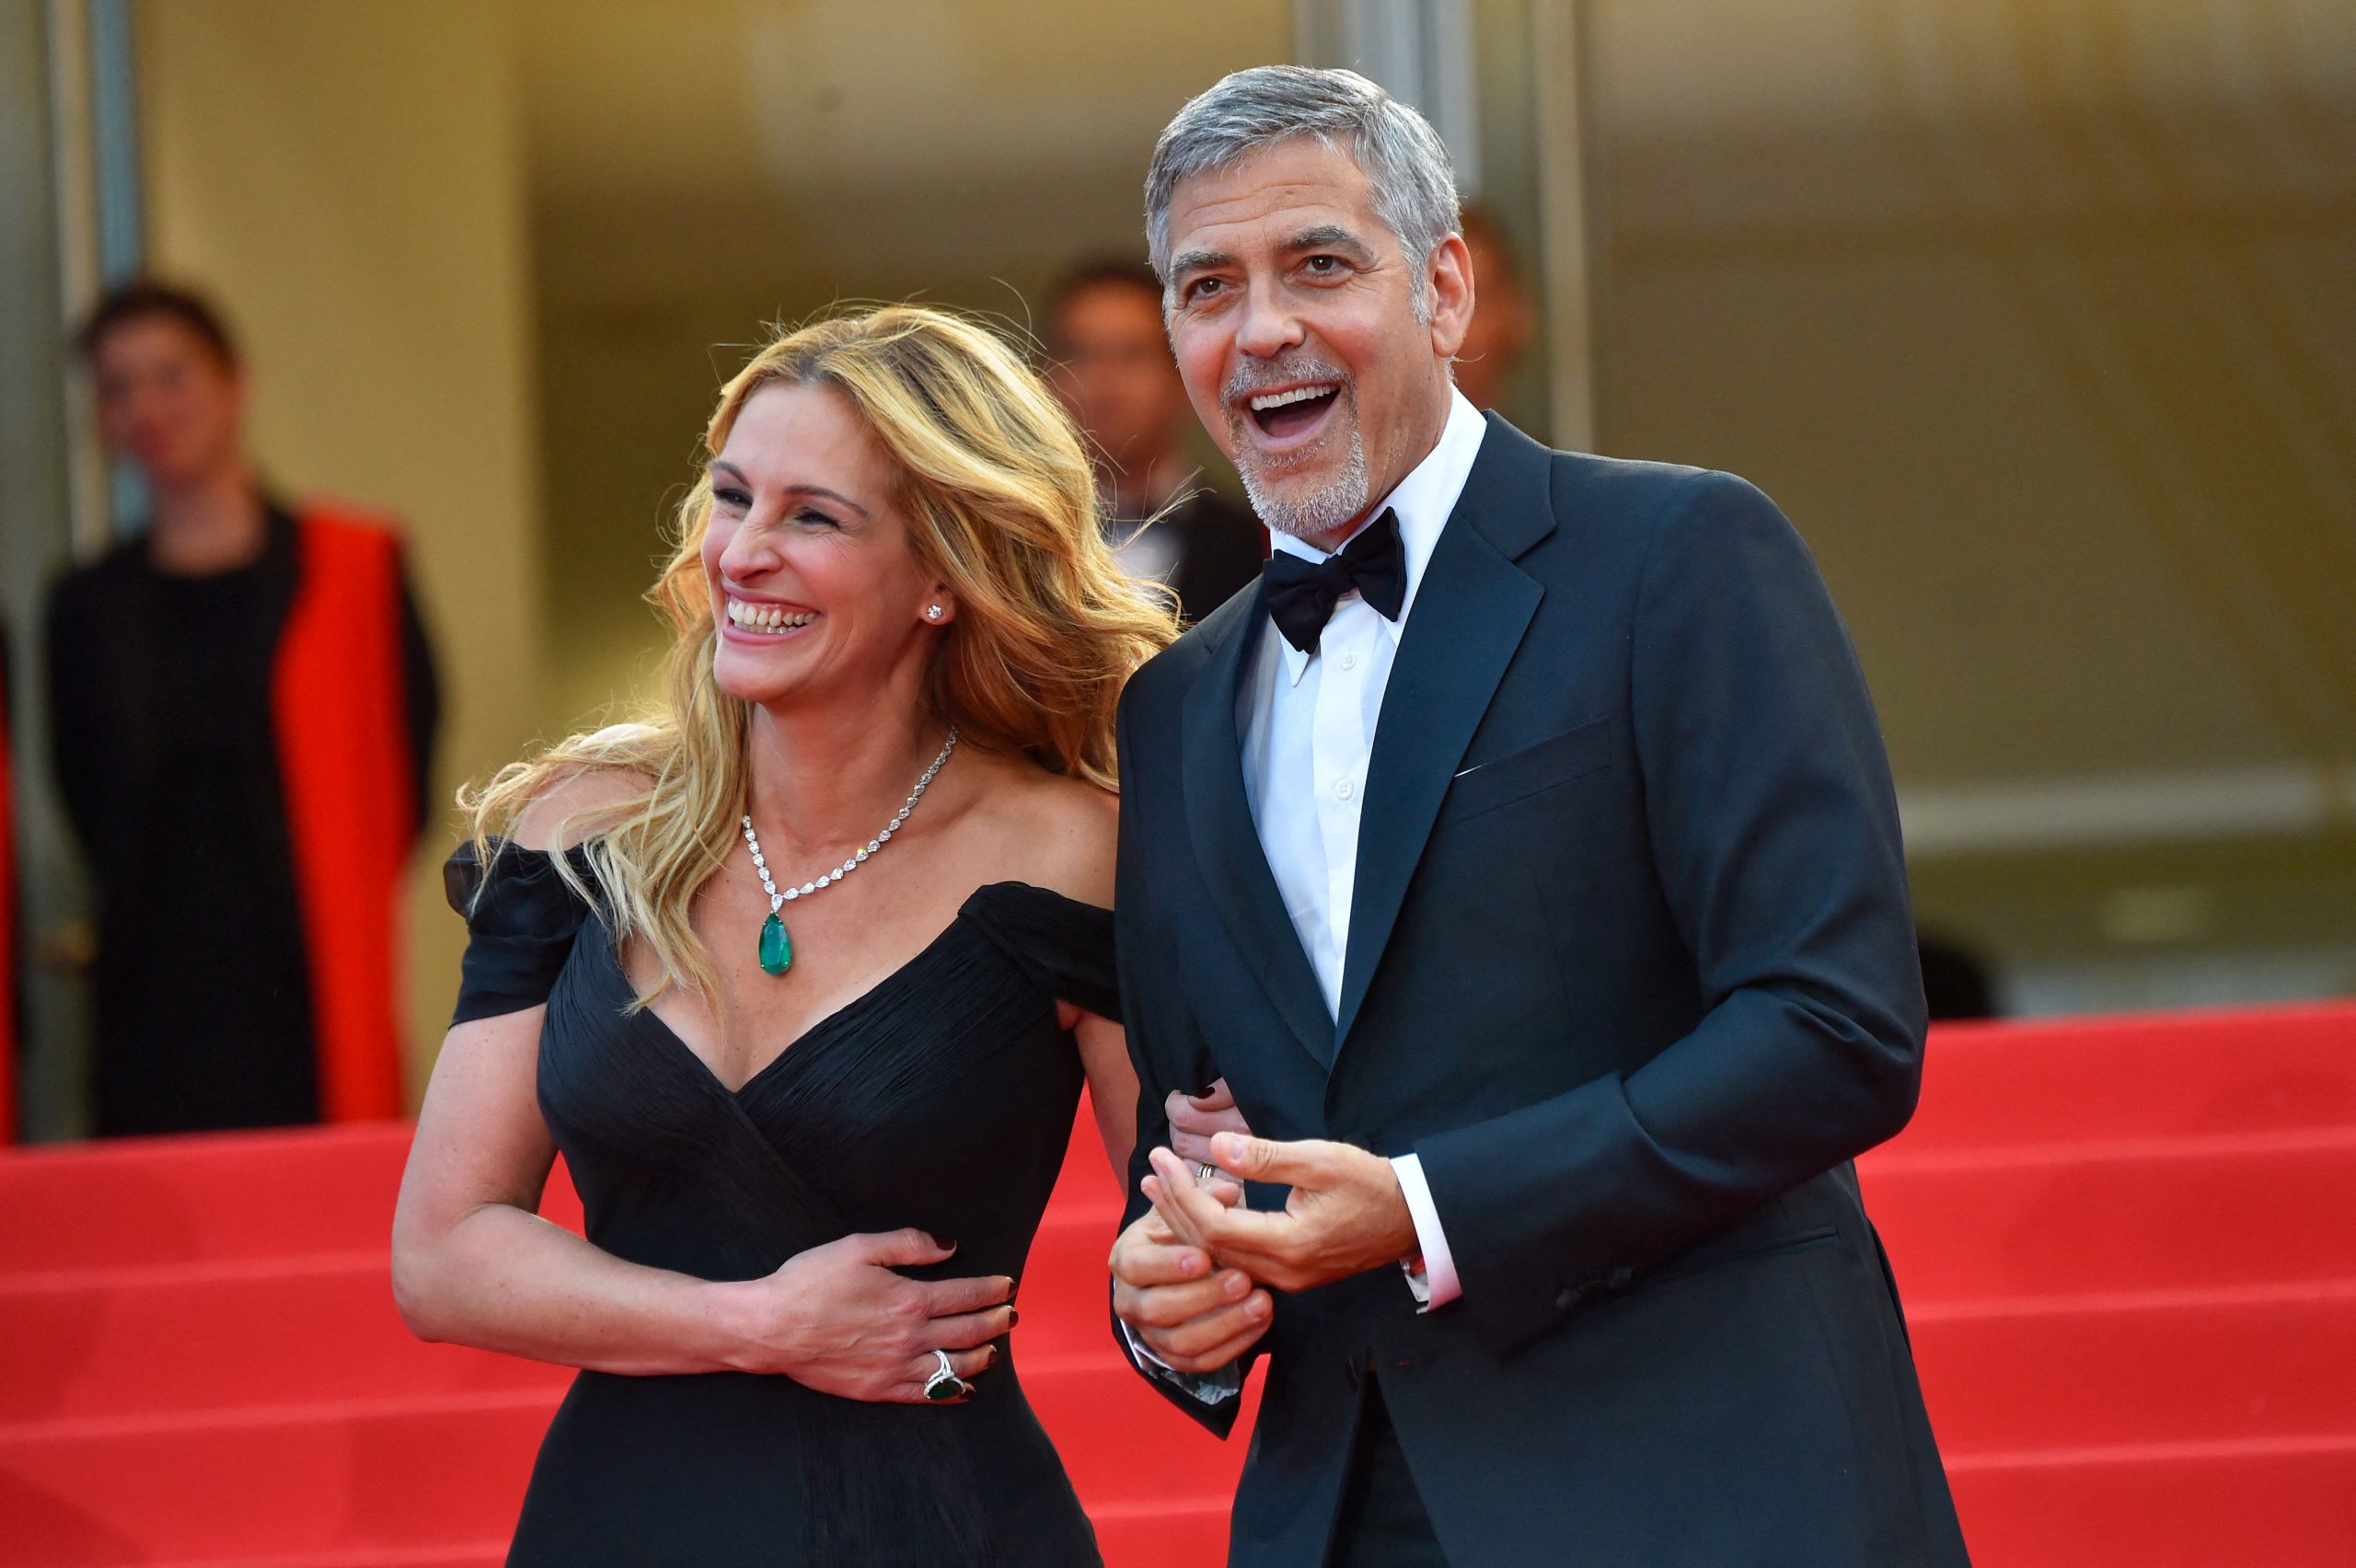 Who is George Clooney?